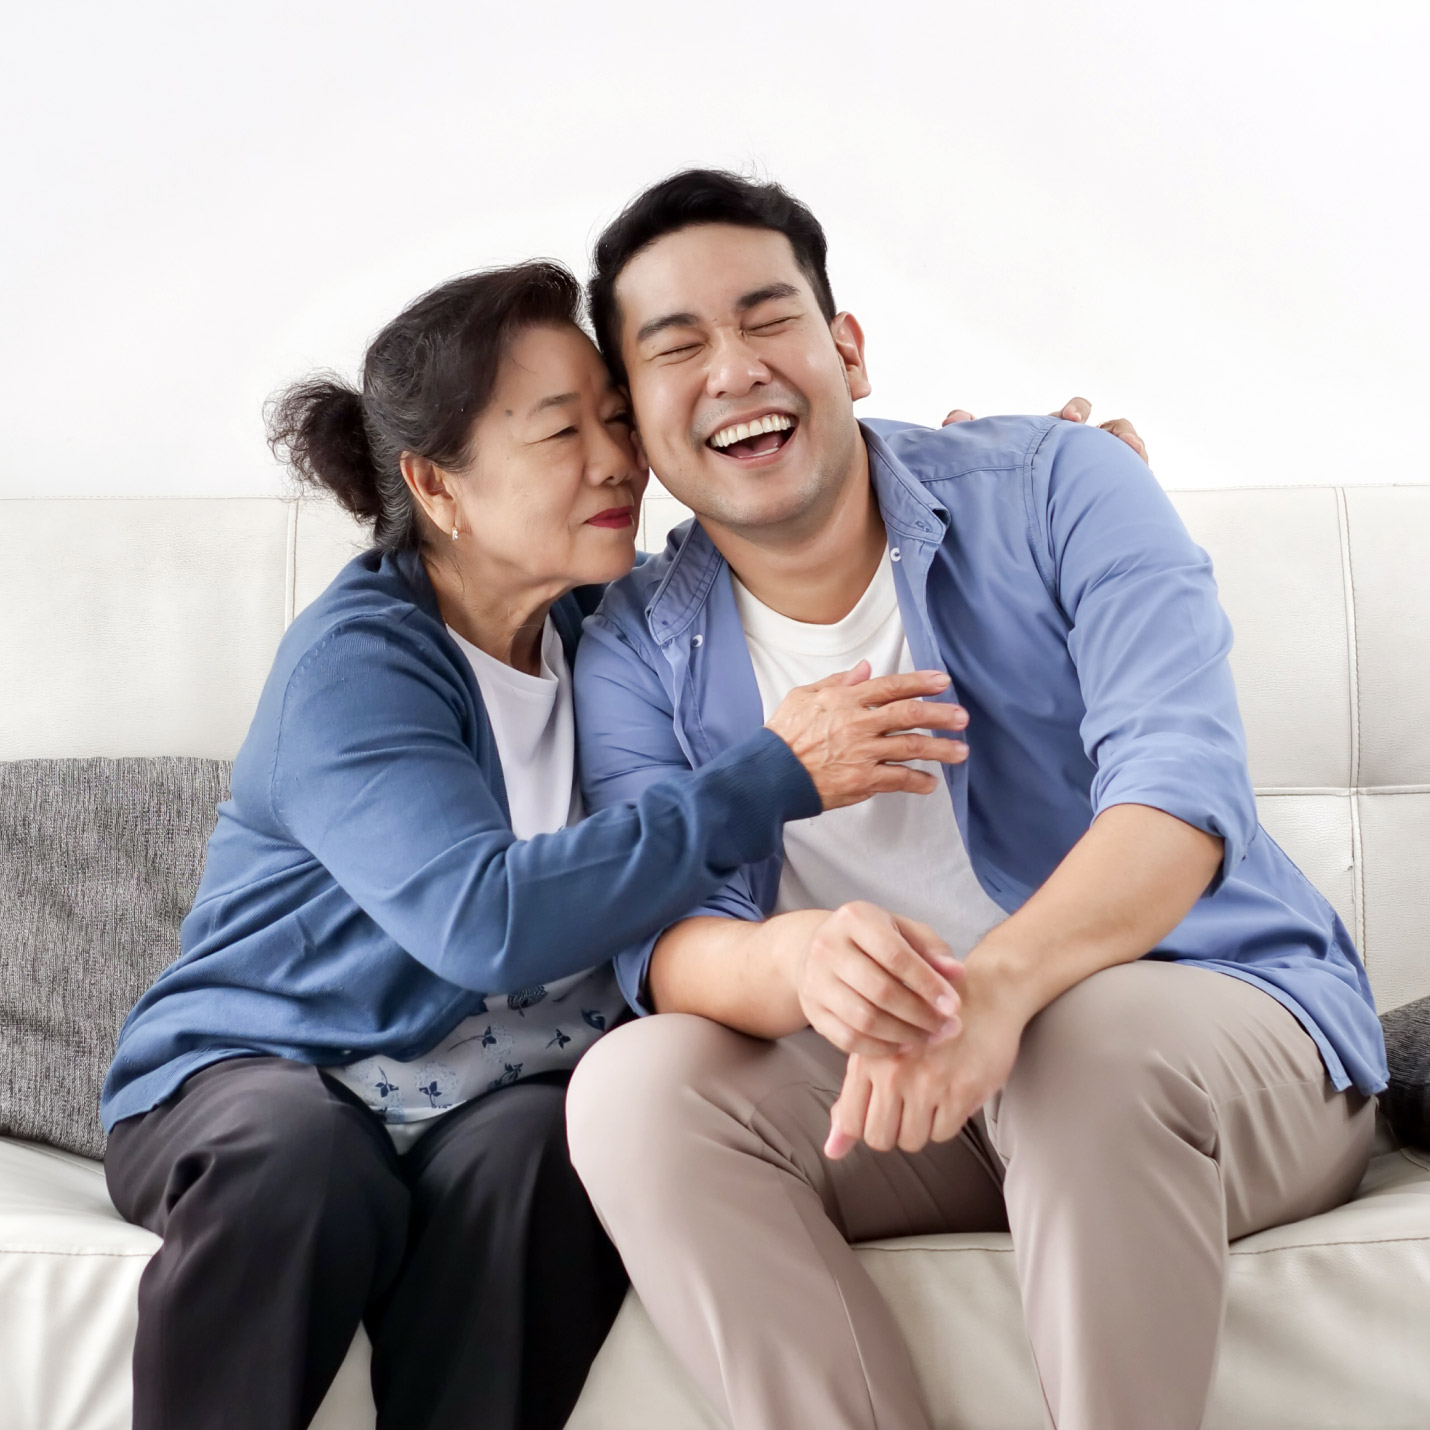 An elderly woman embracing her adult son who is laughing as they share a moment on her home couch together.